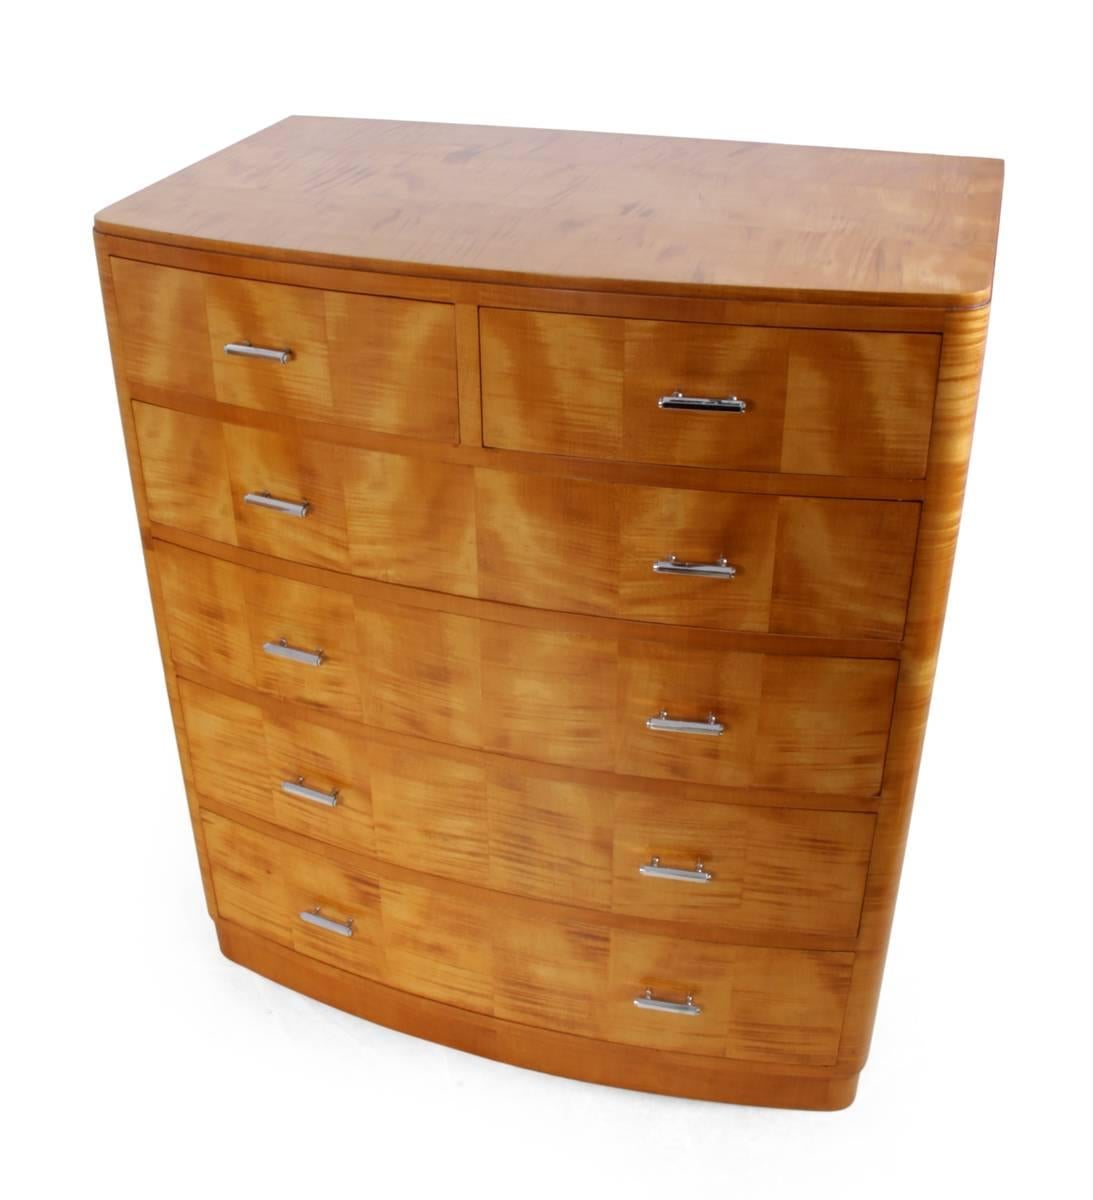 Art Deco satin birch chest of drawers, circa 1930.
This two over four bow fronted chest of drawers was produced in England in the late 1920s or early 1930s from solid mahogany with stunning satin birch veneer, hand cut dovetail joints and chrome